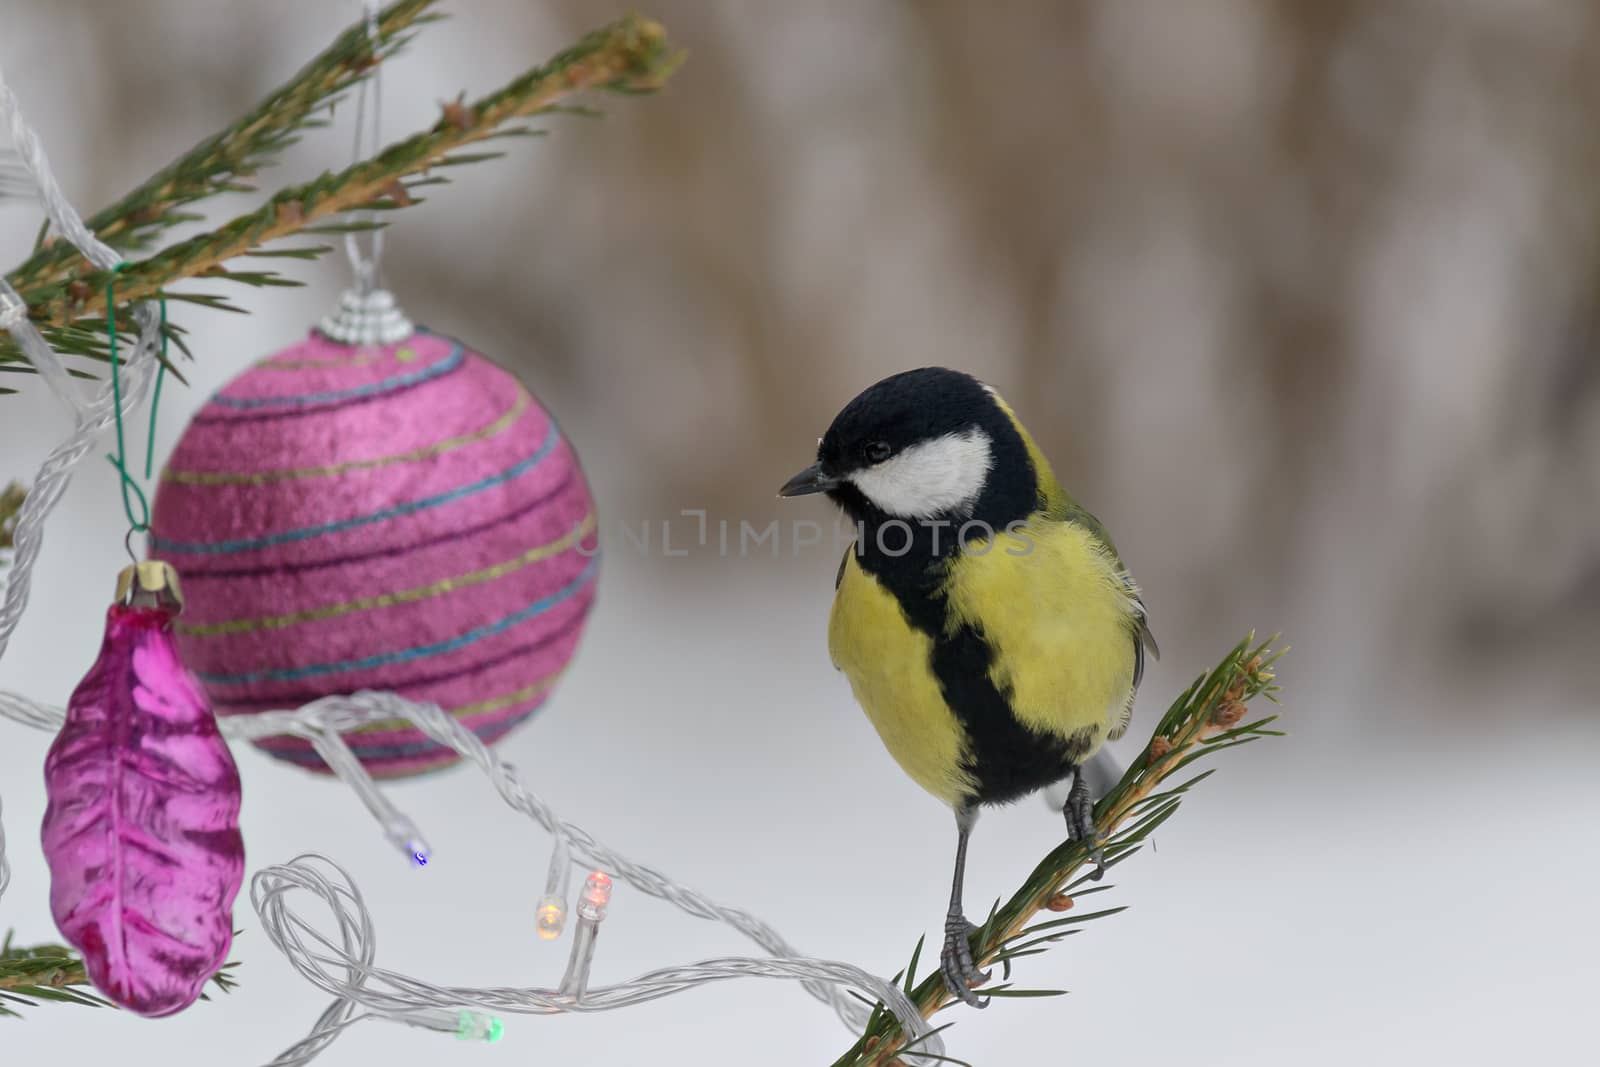 Titmouse sitting on a branch of spruce, decorated for Christmas. by Gaina